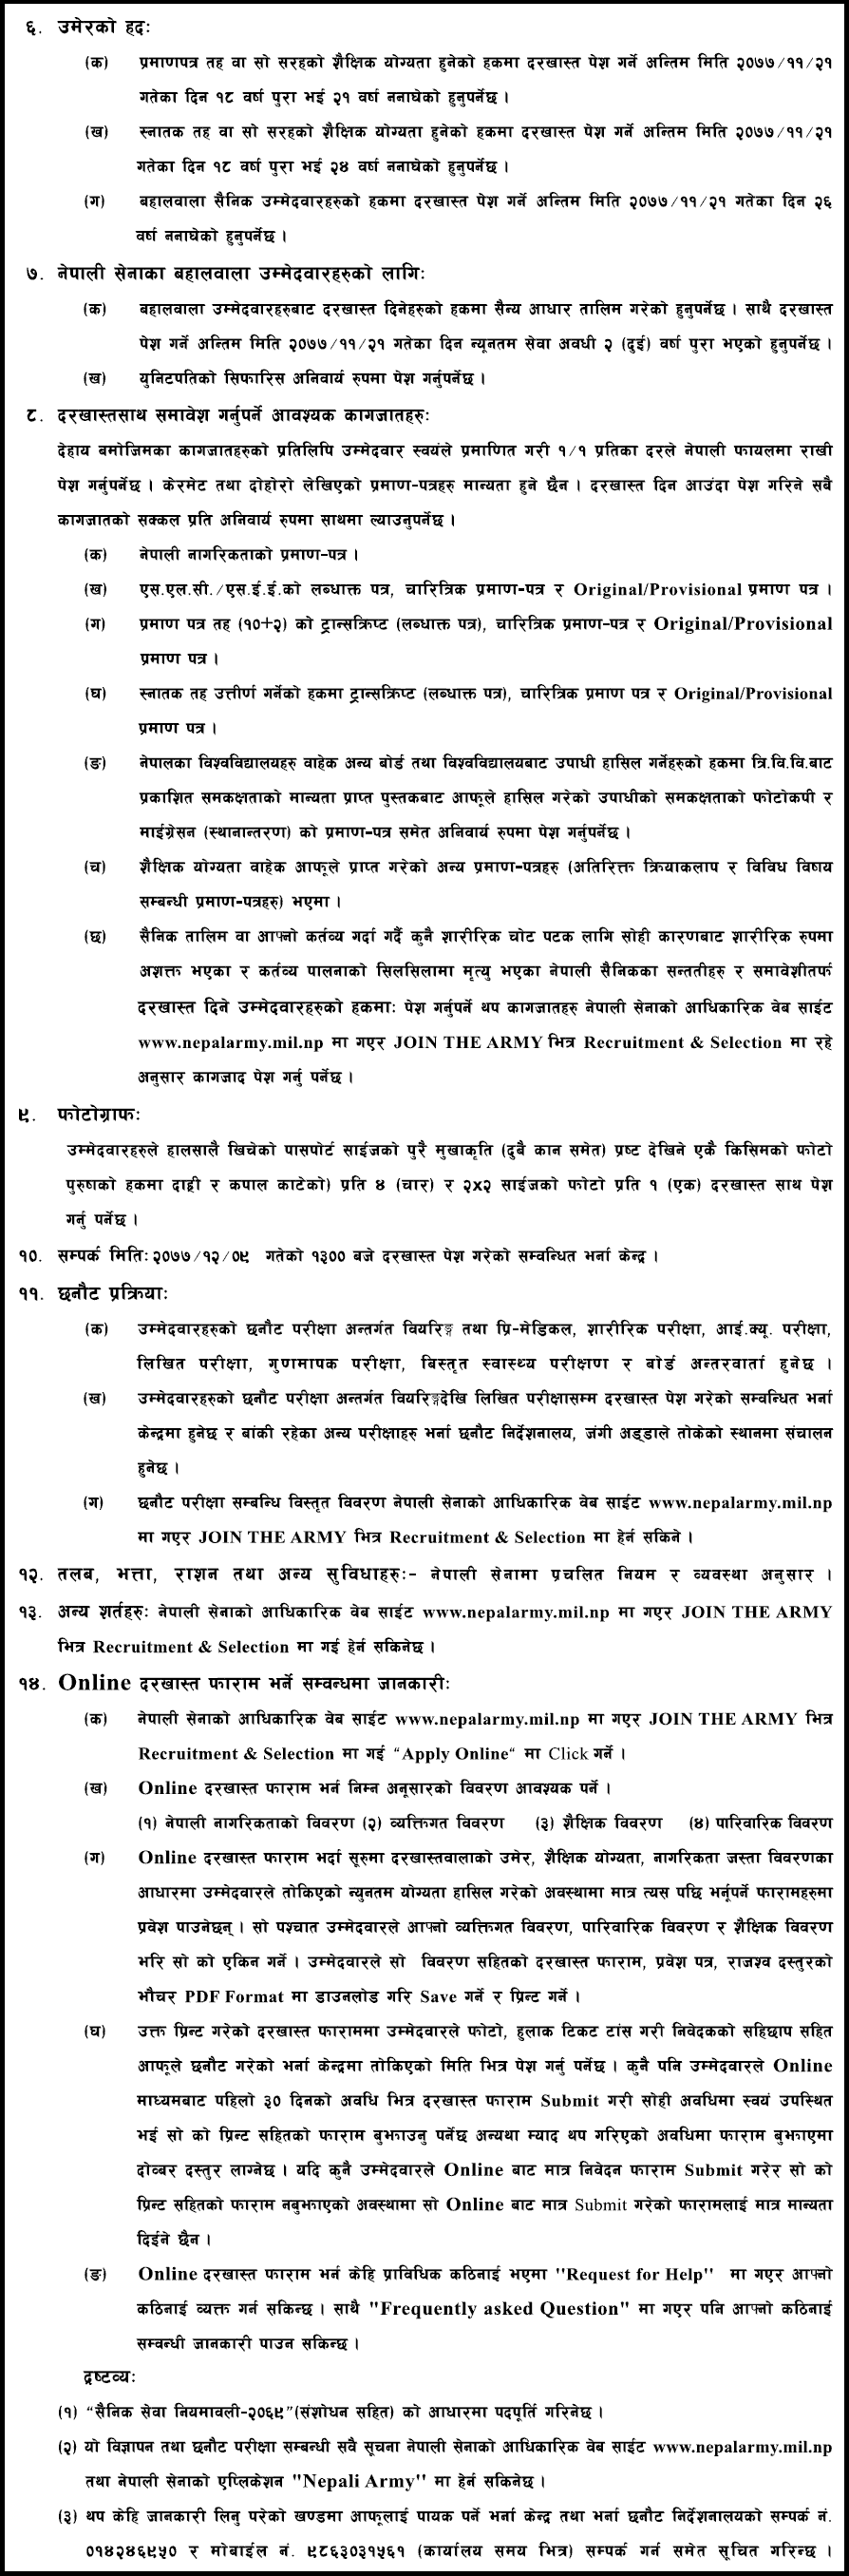 Nepal Army Vacancies for Officer Cadet - 2077